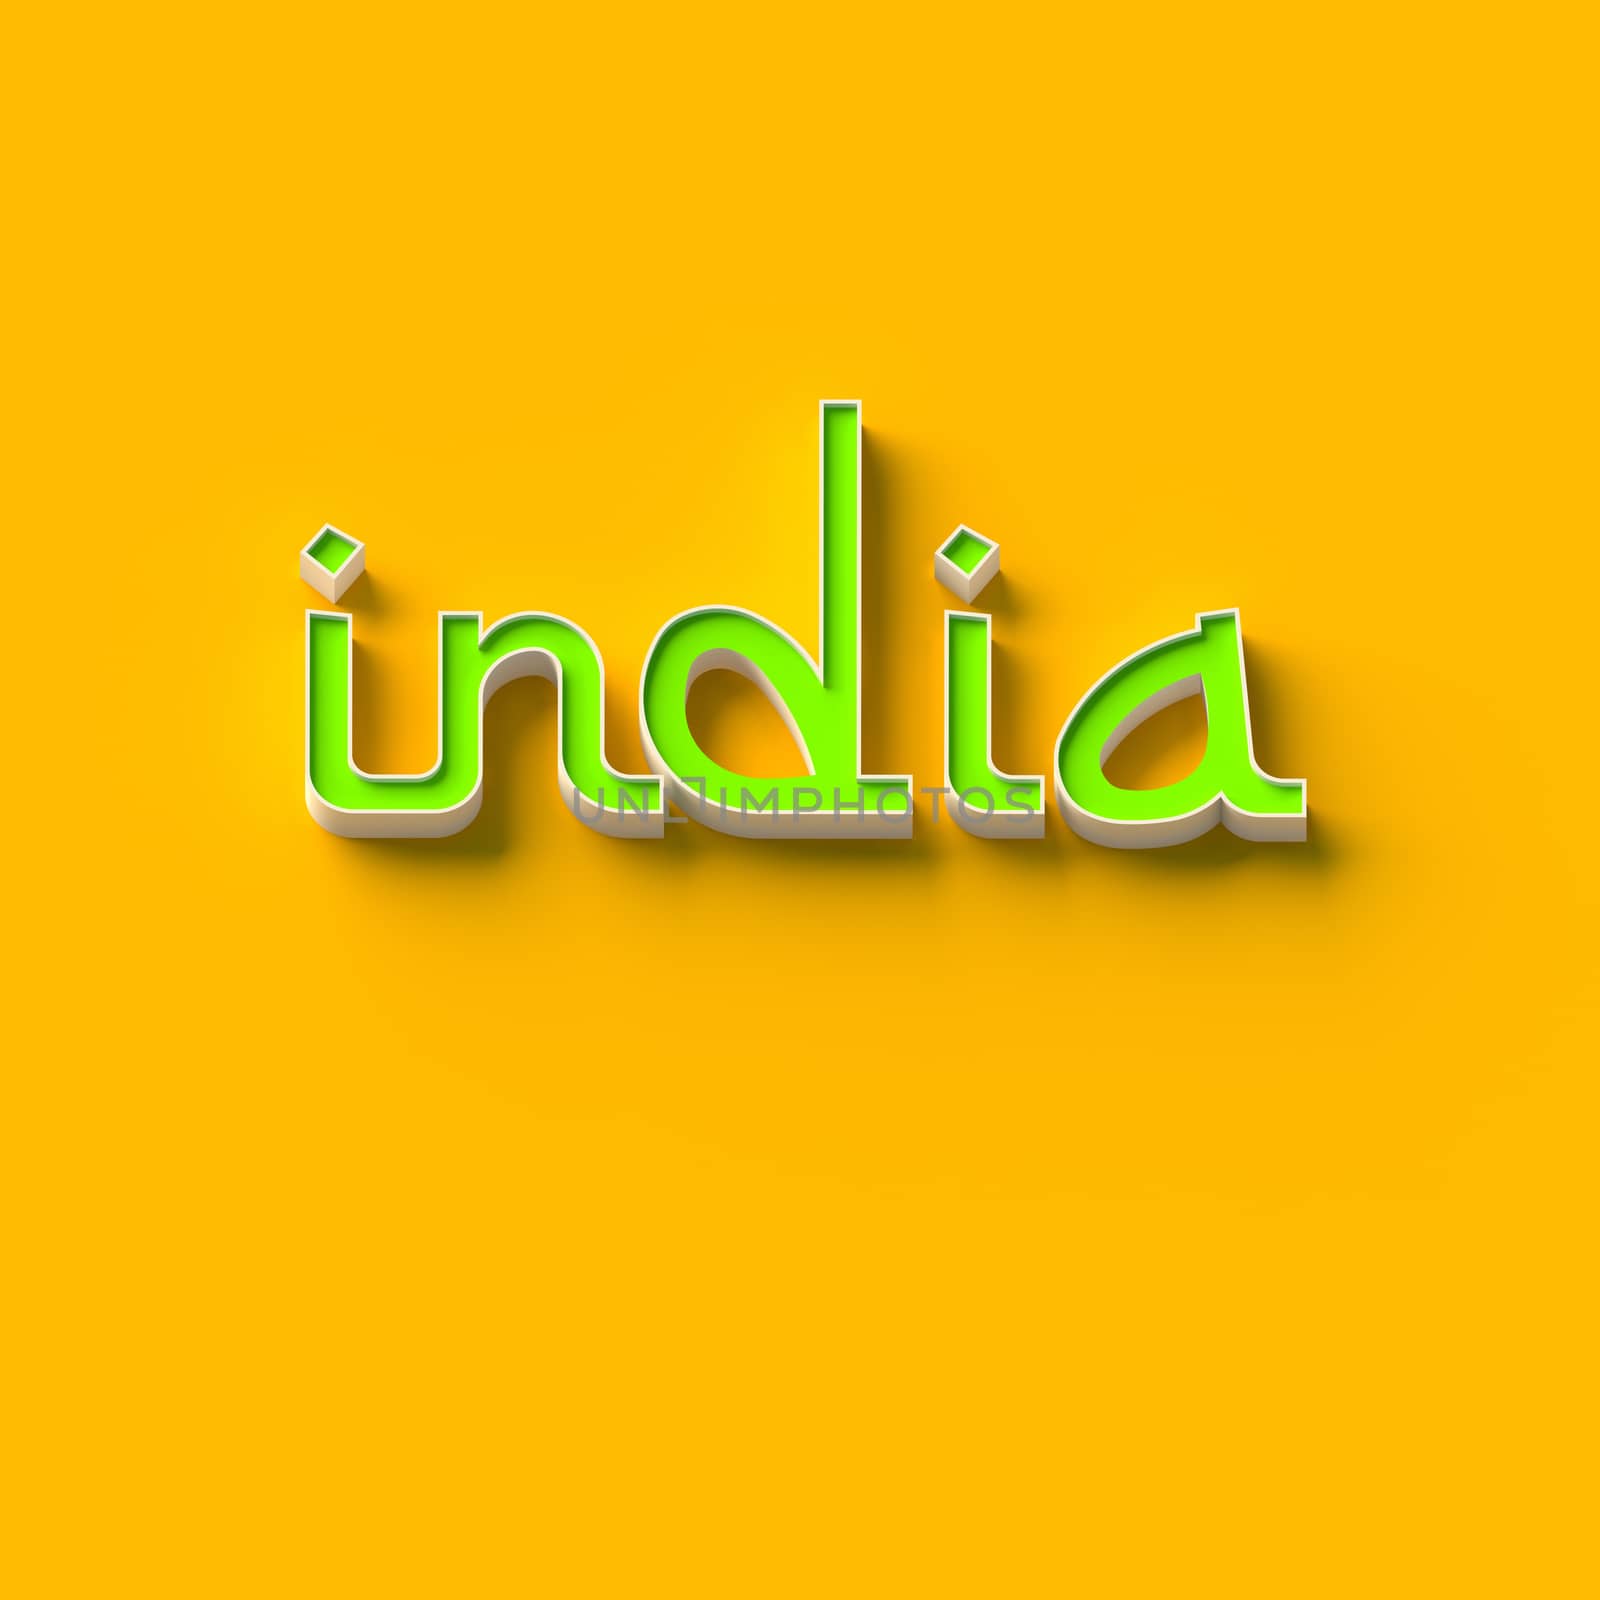 3D RENDERING WORDS "india" ON YELLOW PLAIN BACKGROUND